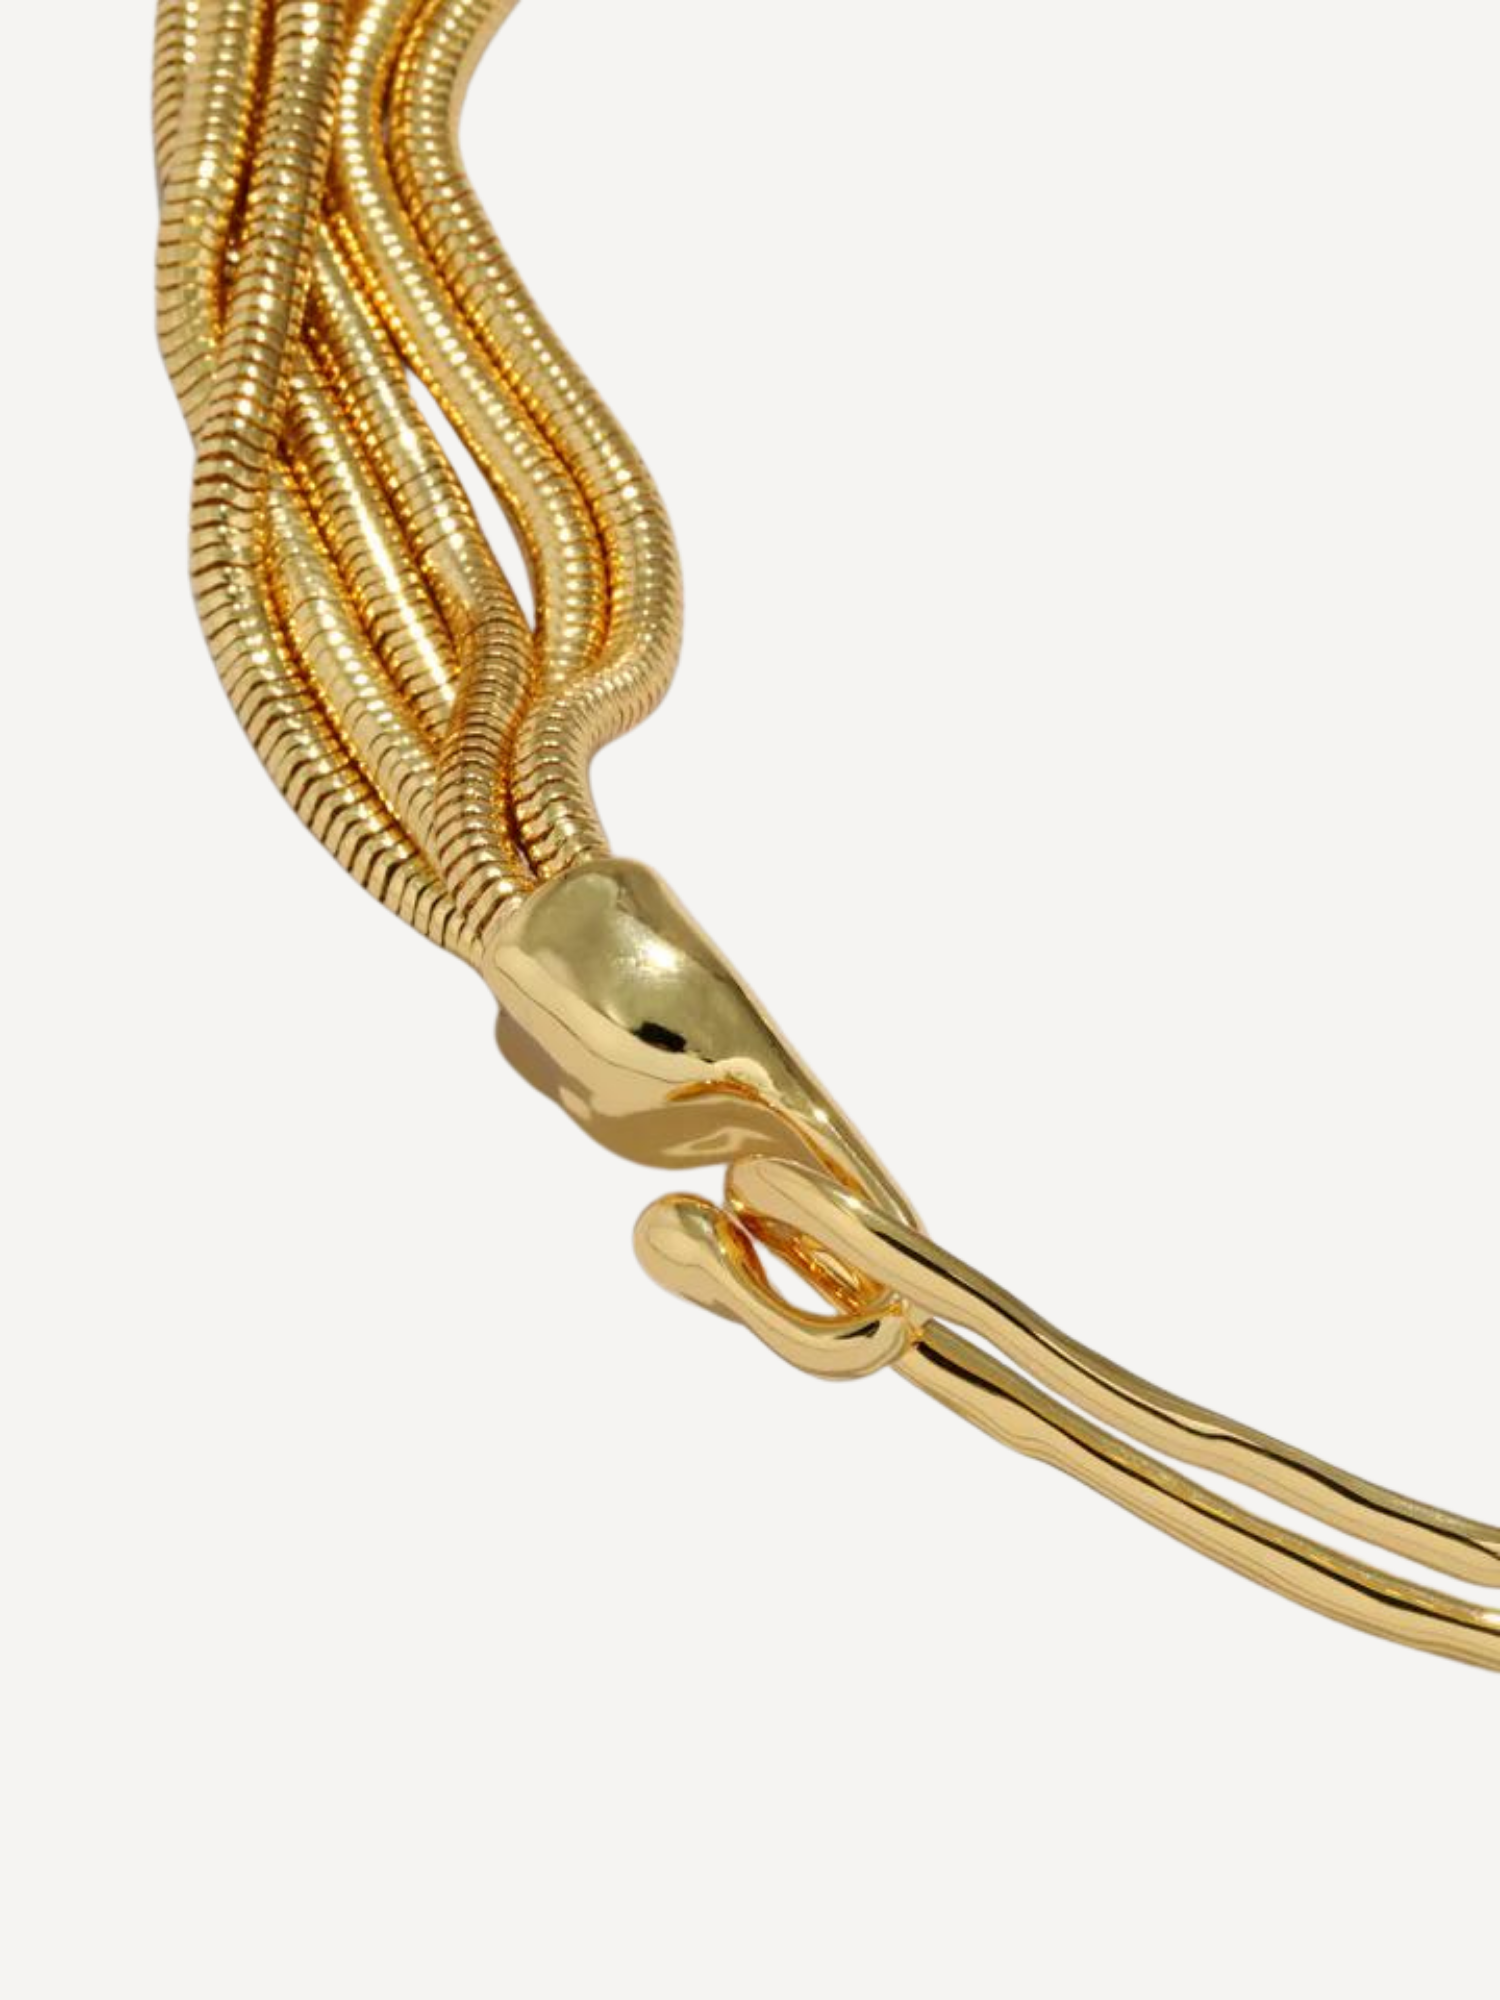 Molten Gold Intertwined Snake Chain Necklace